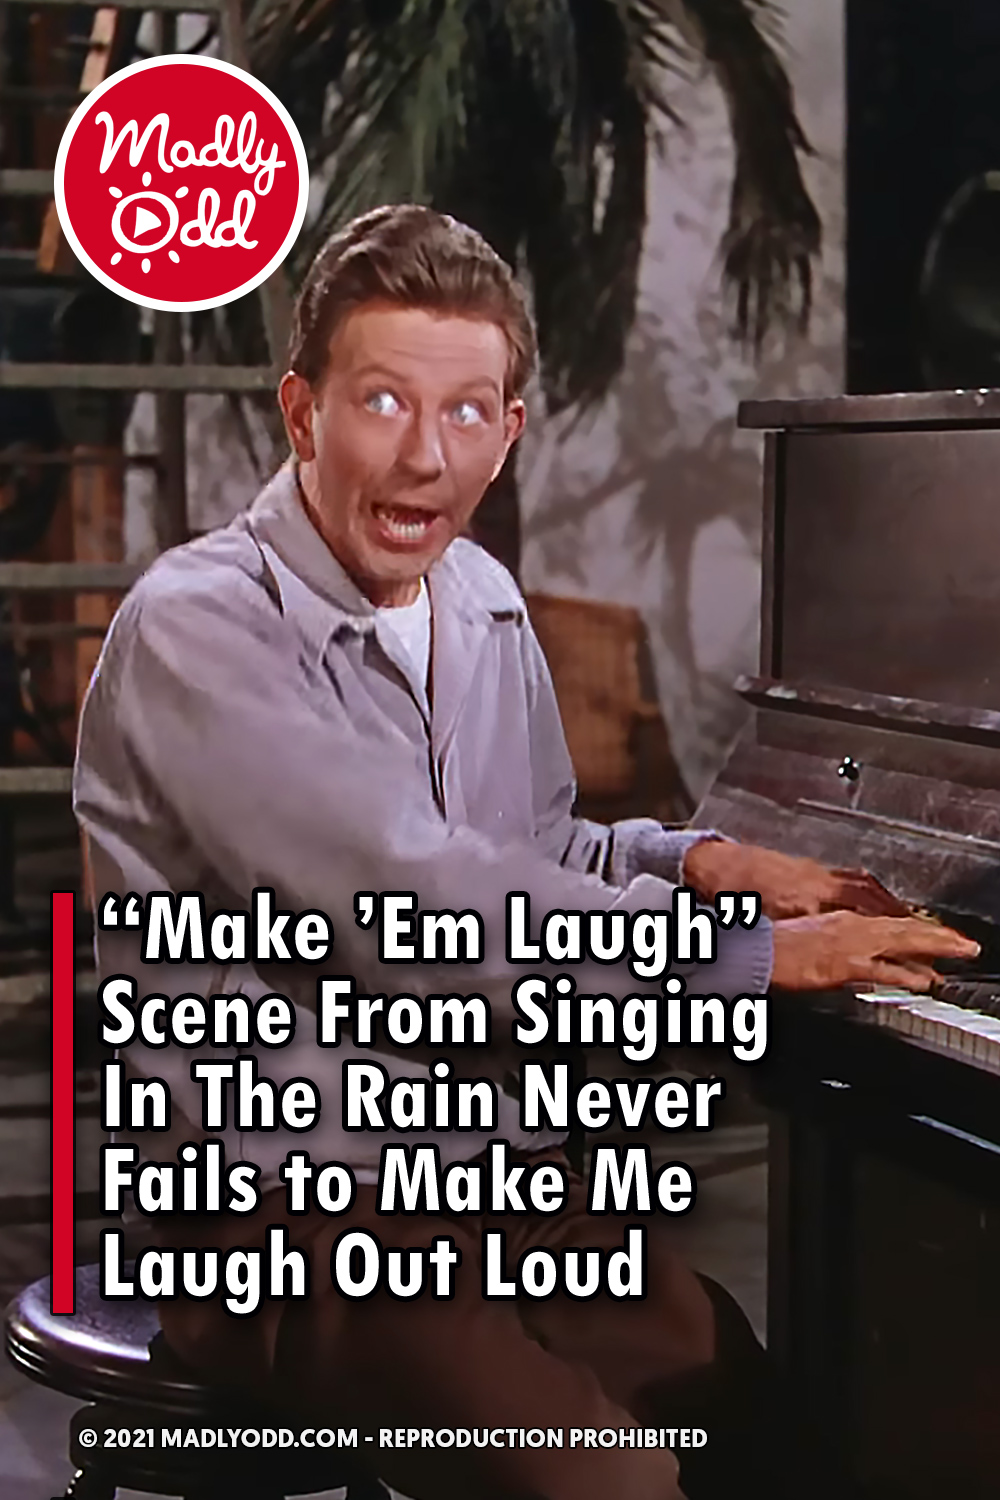 “Make ’Em Laugh” Scene From Singing In The Rain Never Fails to Make Me Laugh Out Loud